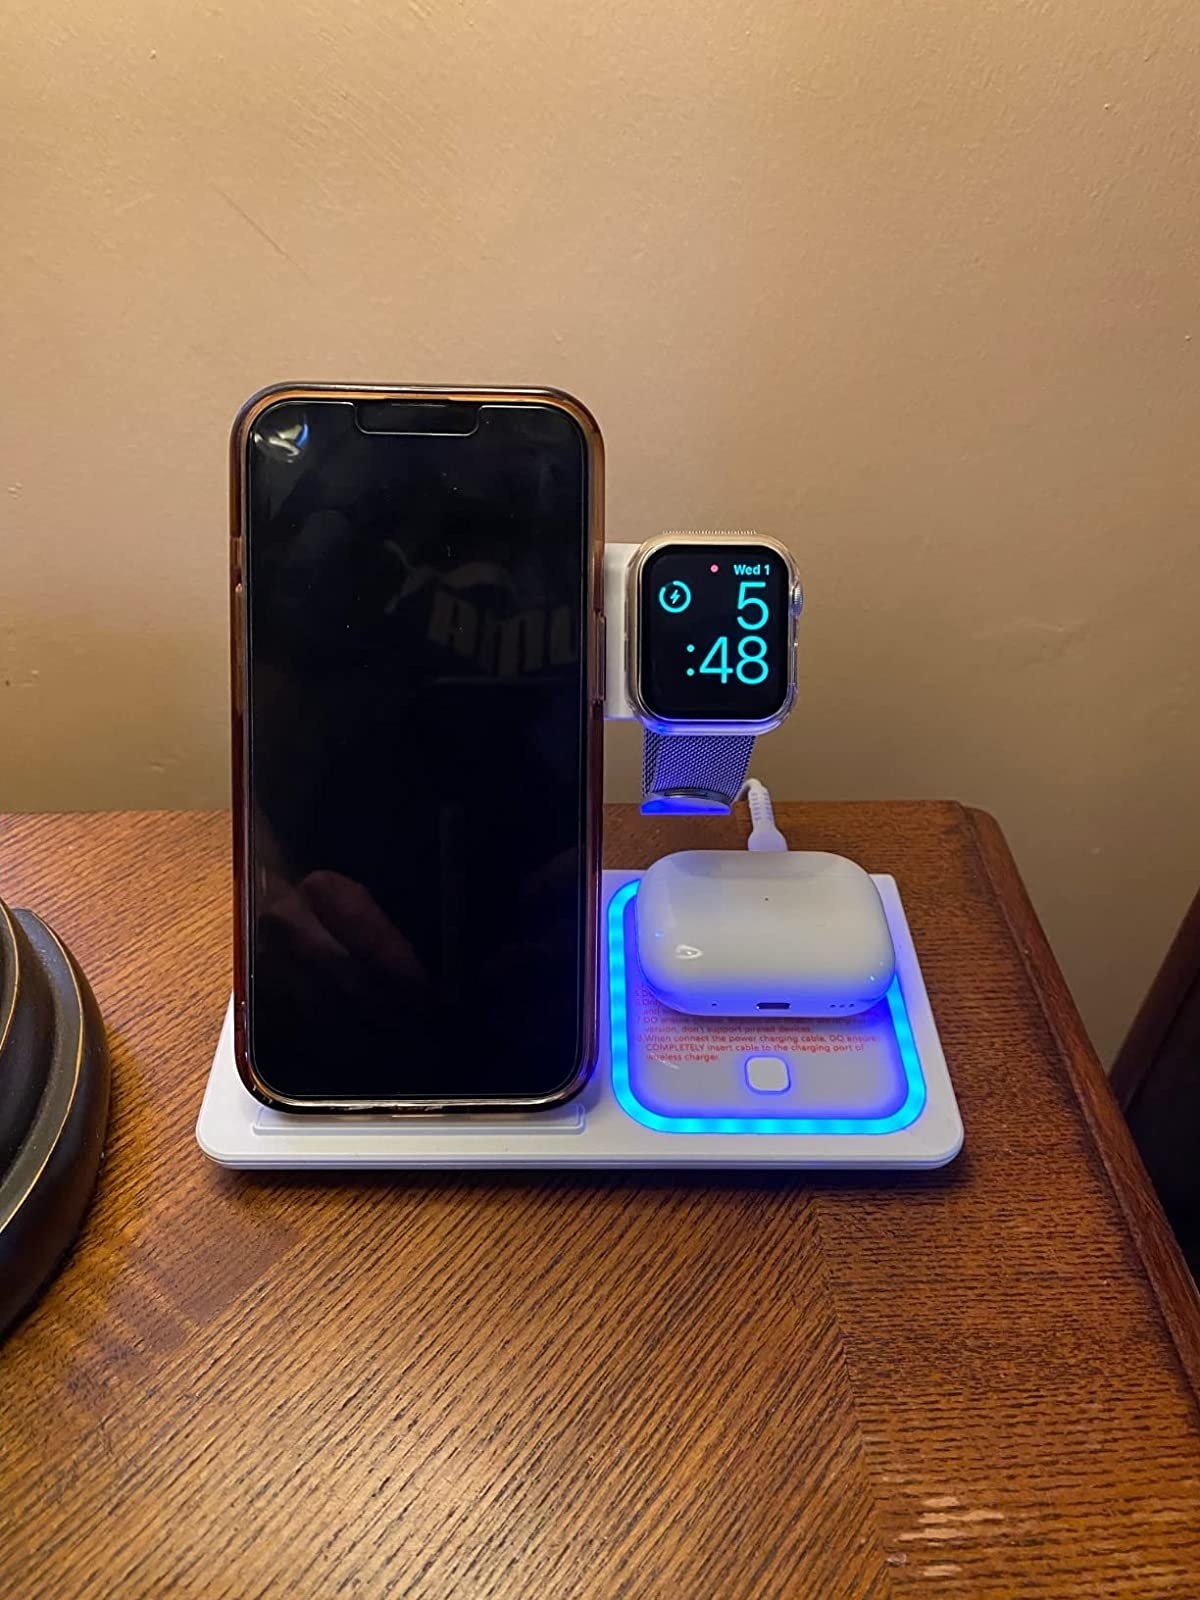 Reviewer image of devices charging in the charging station